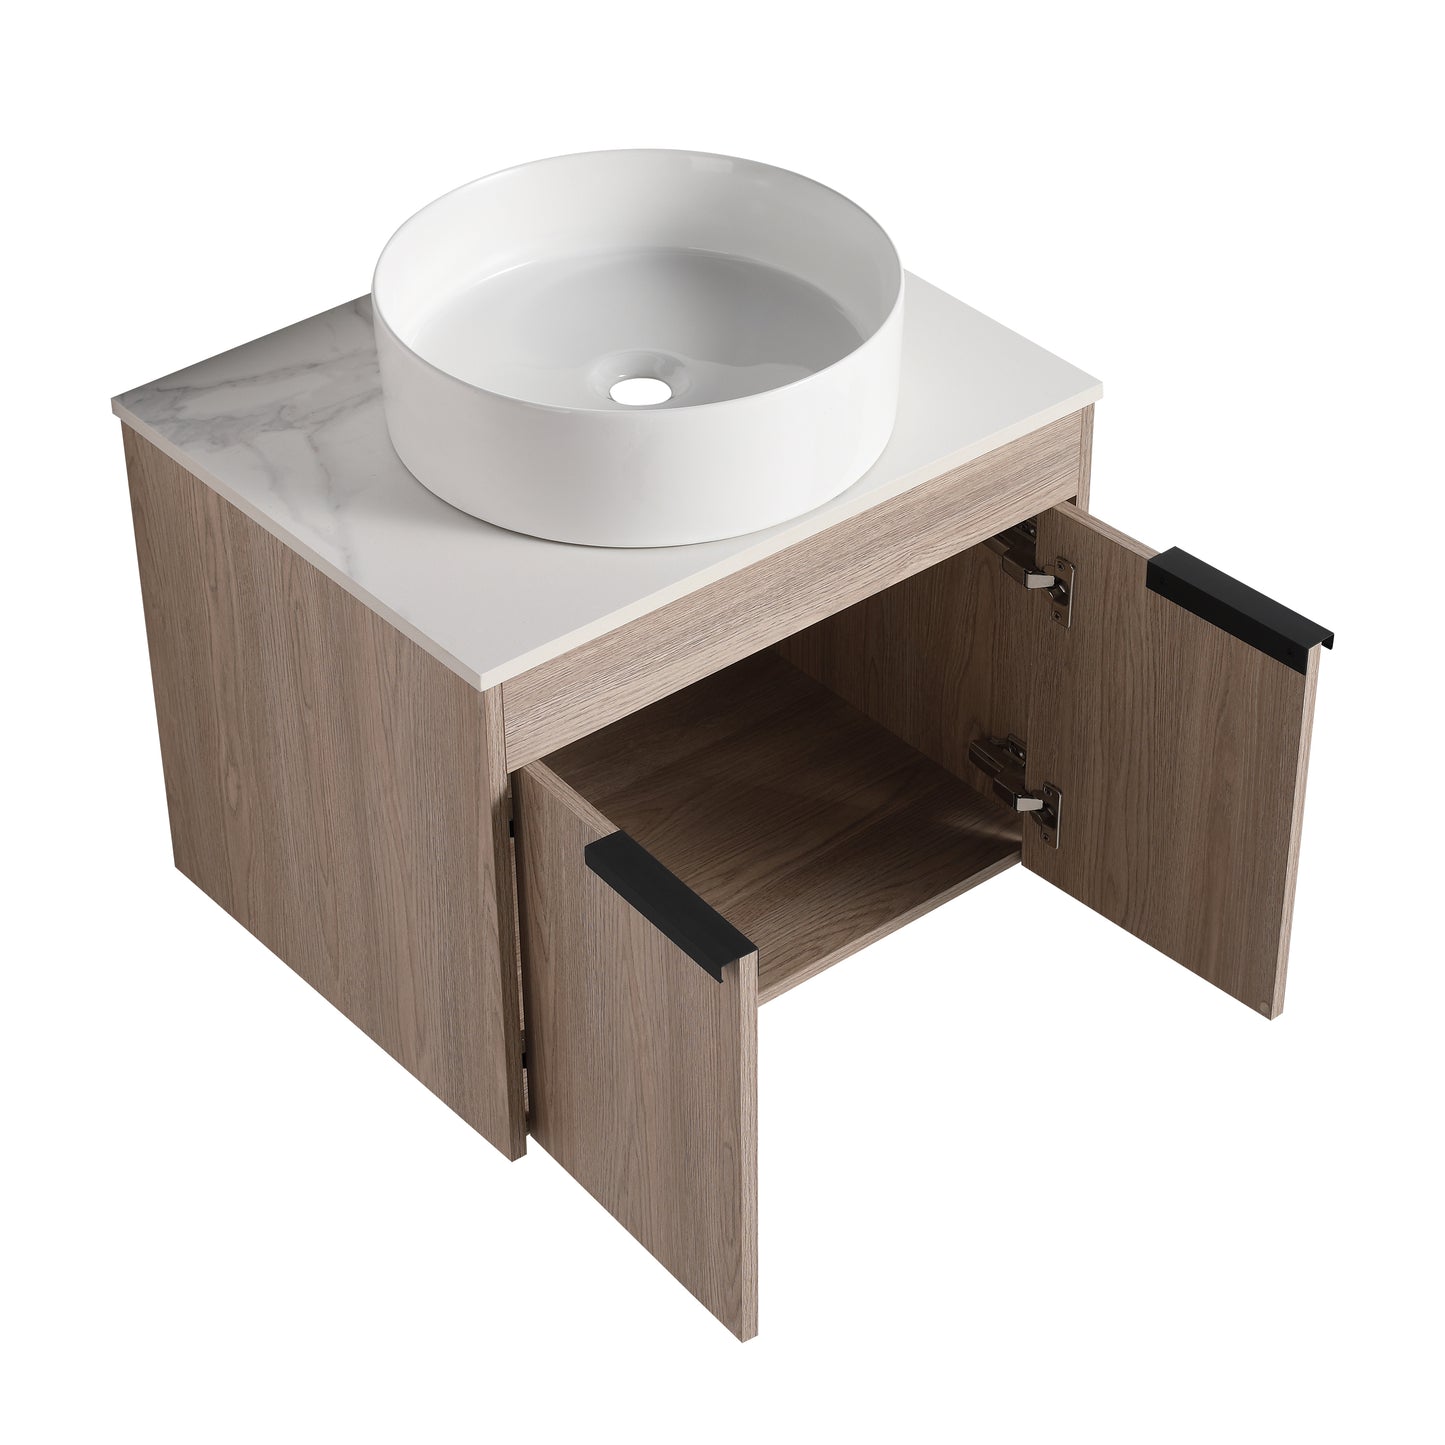 24 " Modern Design Float Bathroom Vanity With Ceramic Basin Set,  Wall Mounted White Oak Vanity  With Soft Close Door,KD-Packing，KD-Packing，2 Pieces Parcel（TOP-BAB400MOWH）